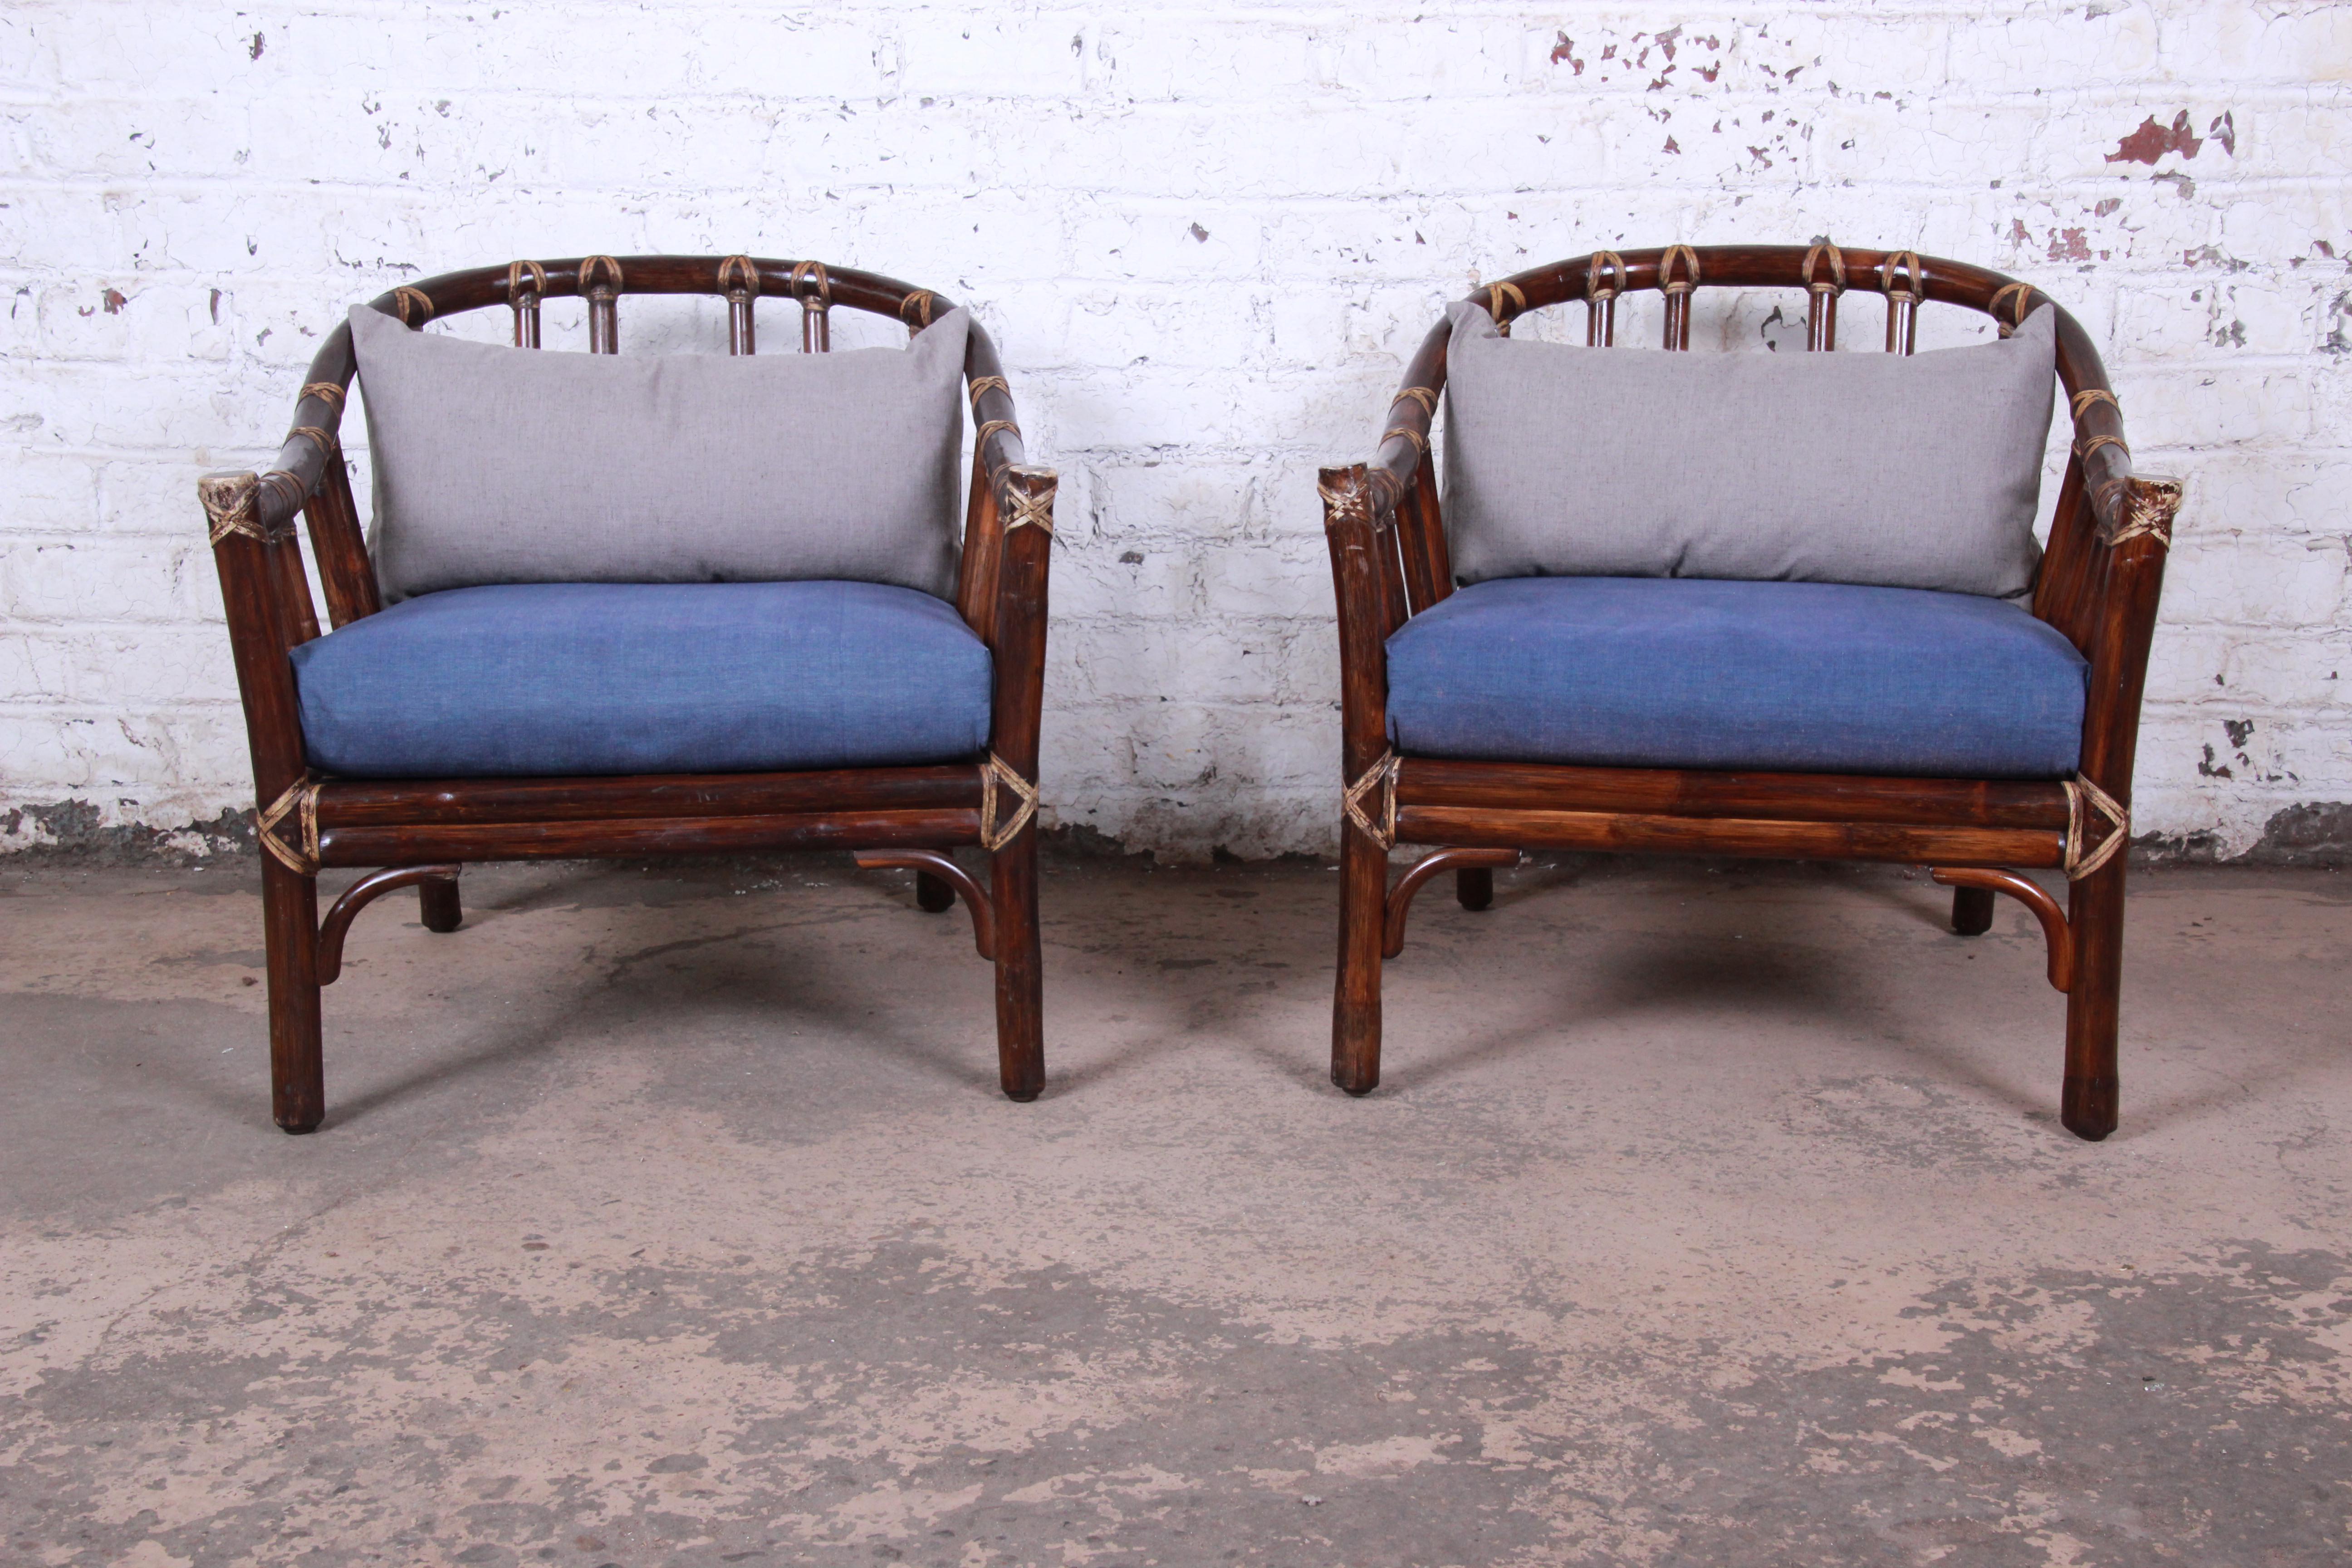 A gorgeous pair of midcentury Hollywood Regency club chairs by McGuire of San Francisco, circa 1978. The chairs are expertly constructed of bent rattan and hardwood, aged to perfection. Lacquer finish with beautiful depth and warmth. The original